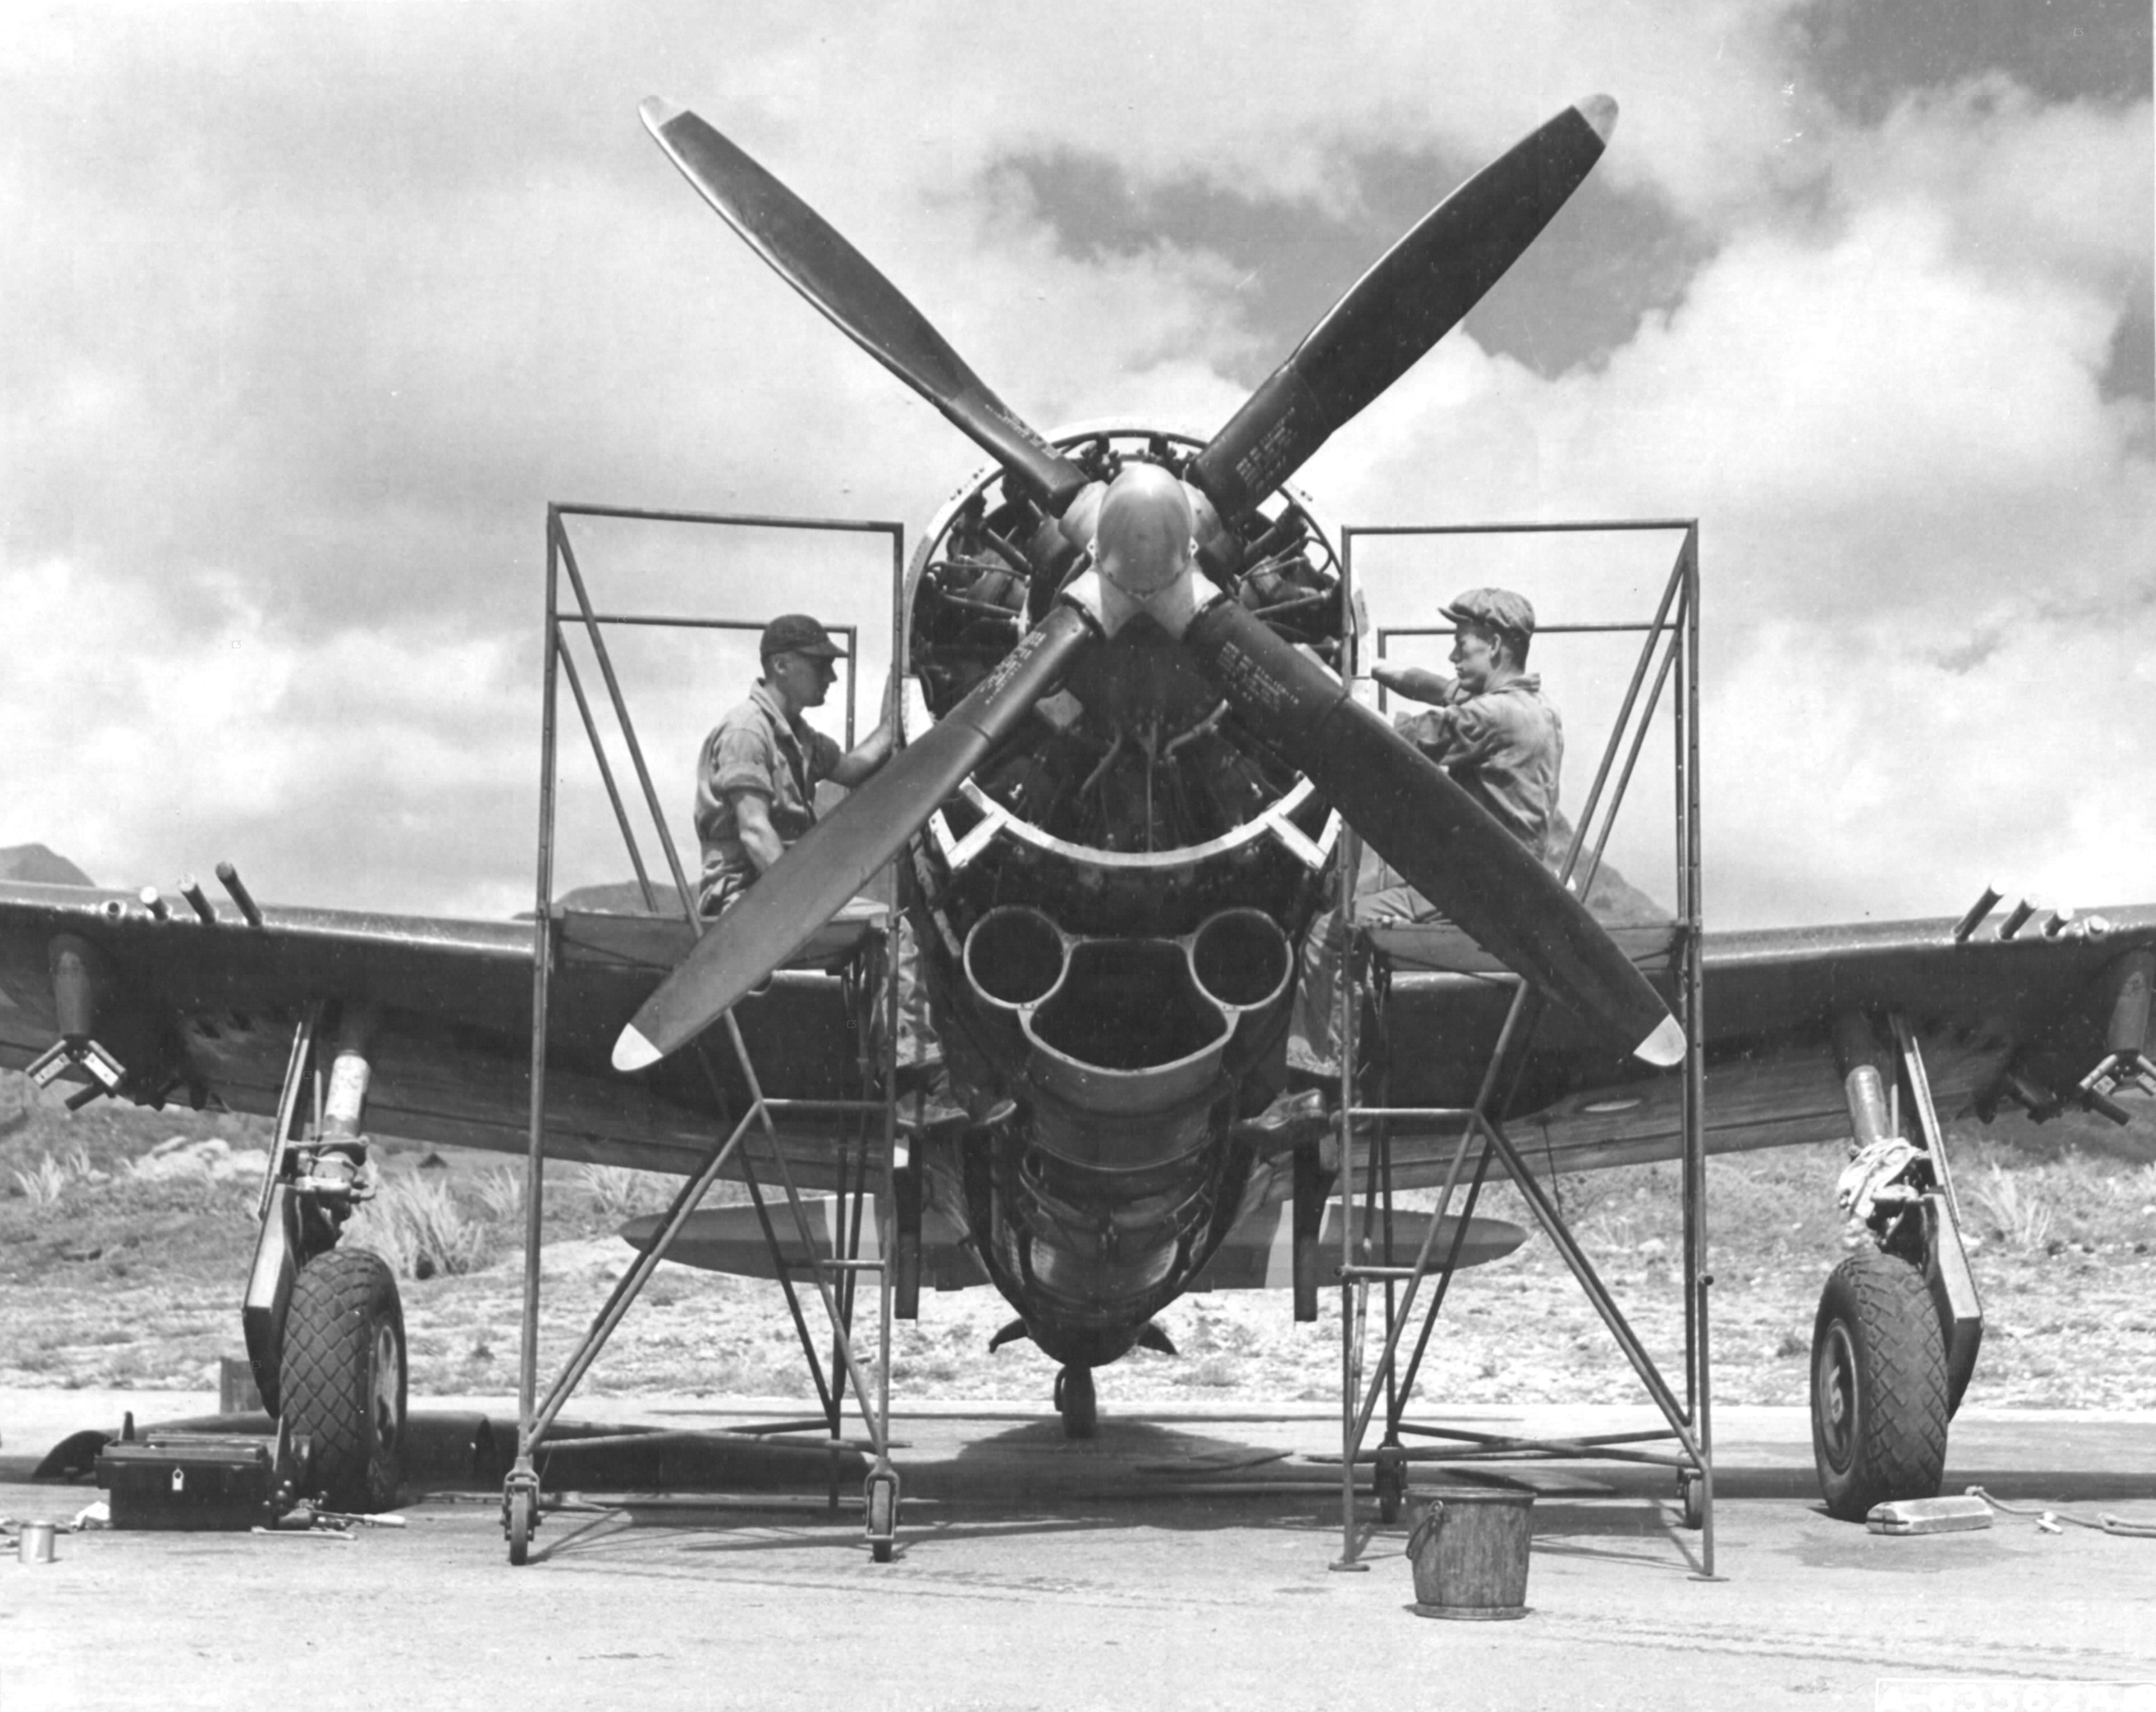 P-47 Thunderbolt aircraft of the 318th Fighter Group receiving maintenance before an inspection at Bellows Field, Oahu, US Territory of Hawaii, 15 May 1944.